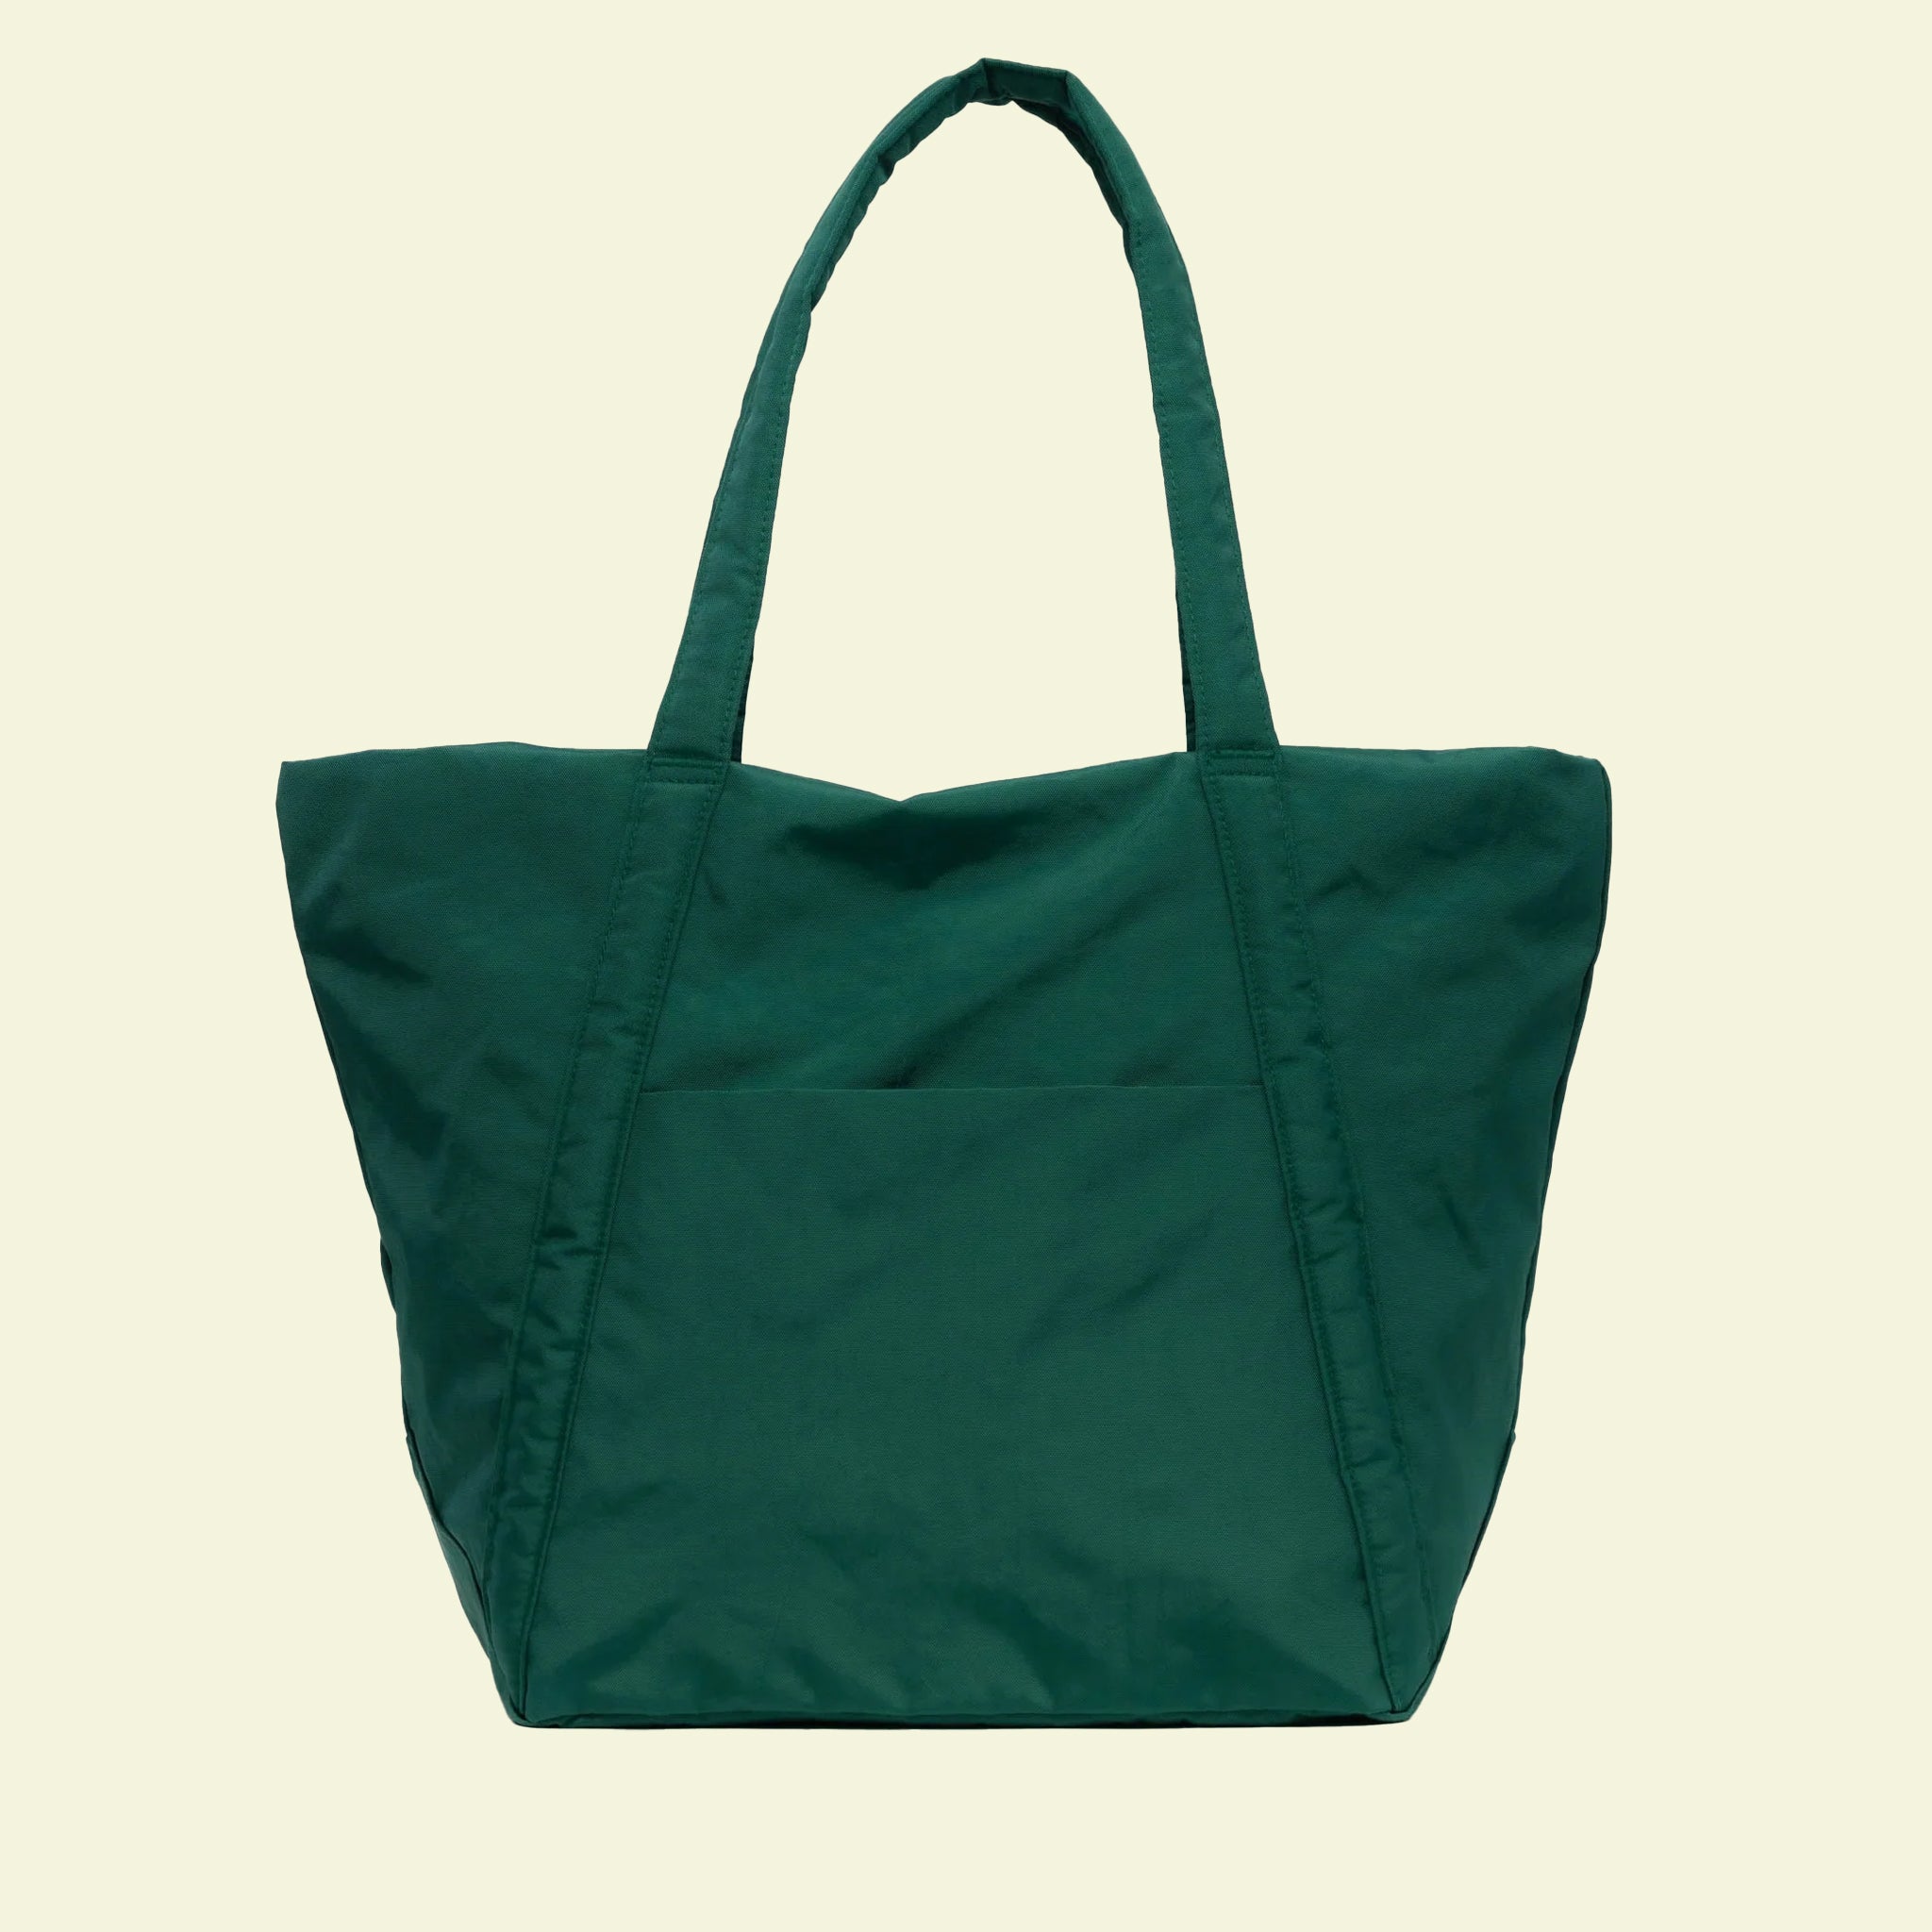 A dark green nylon tote bag with two hand straps and a front pocket.